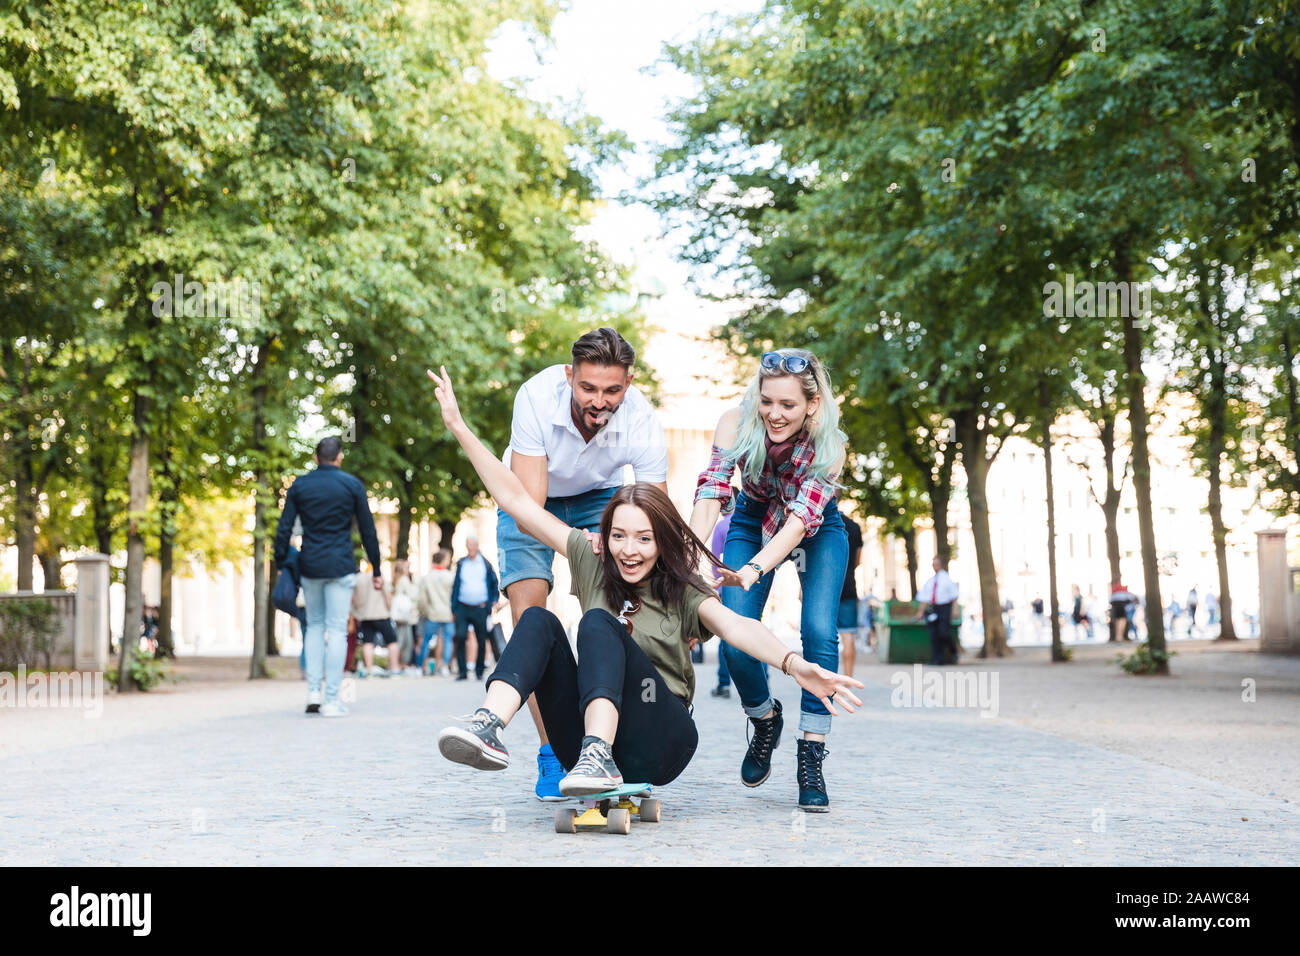 Group of three friends having fun with skateboard Stock Photo